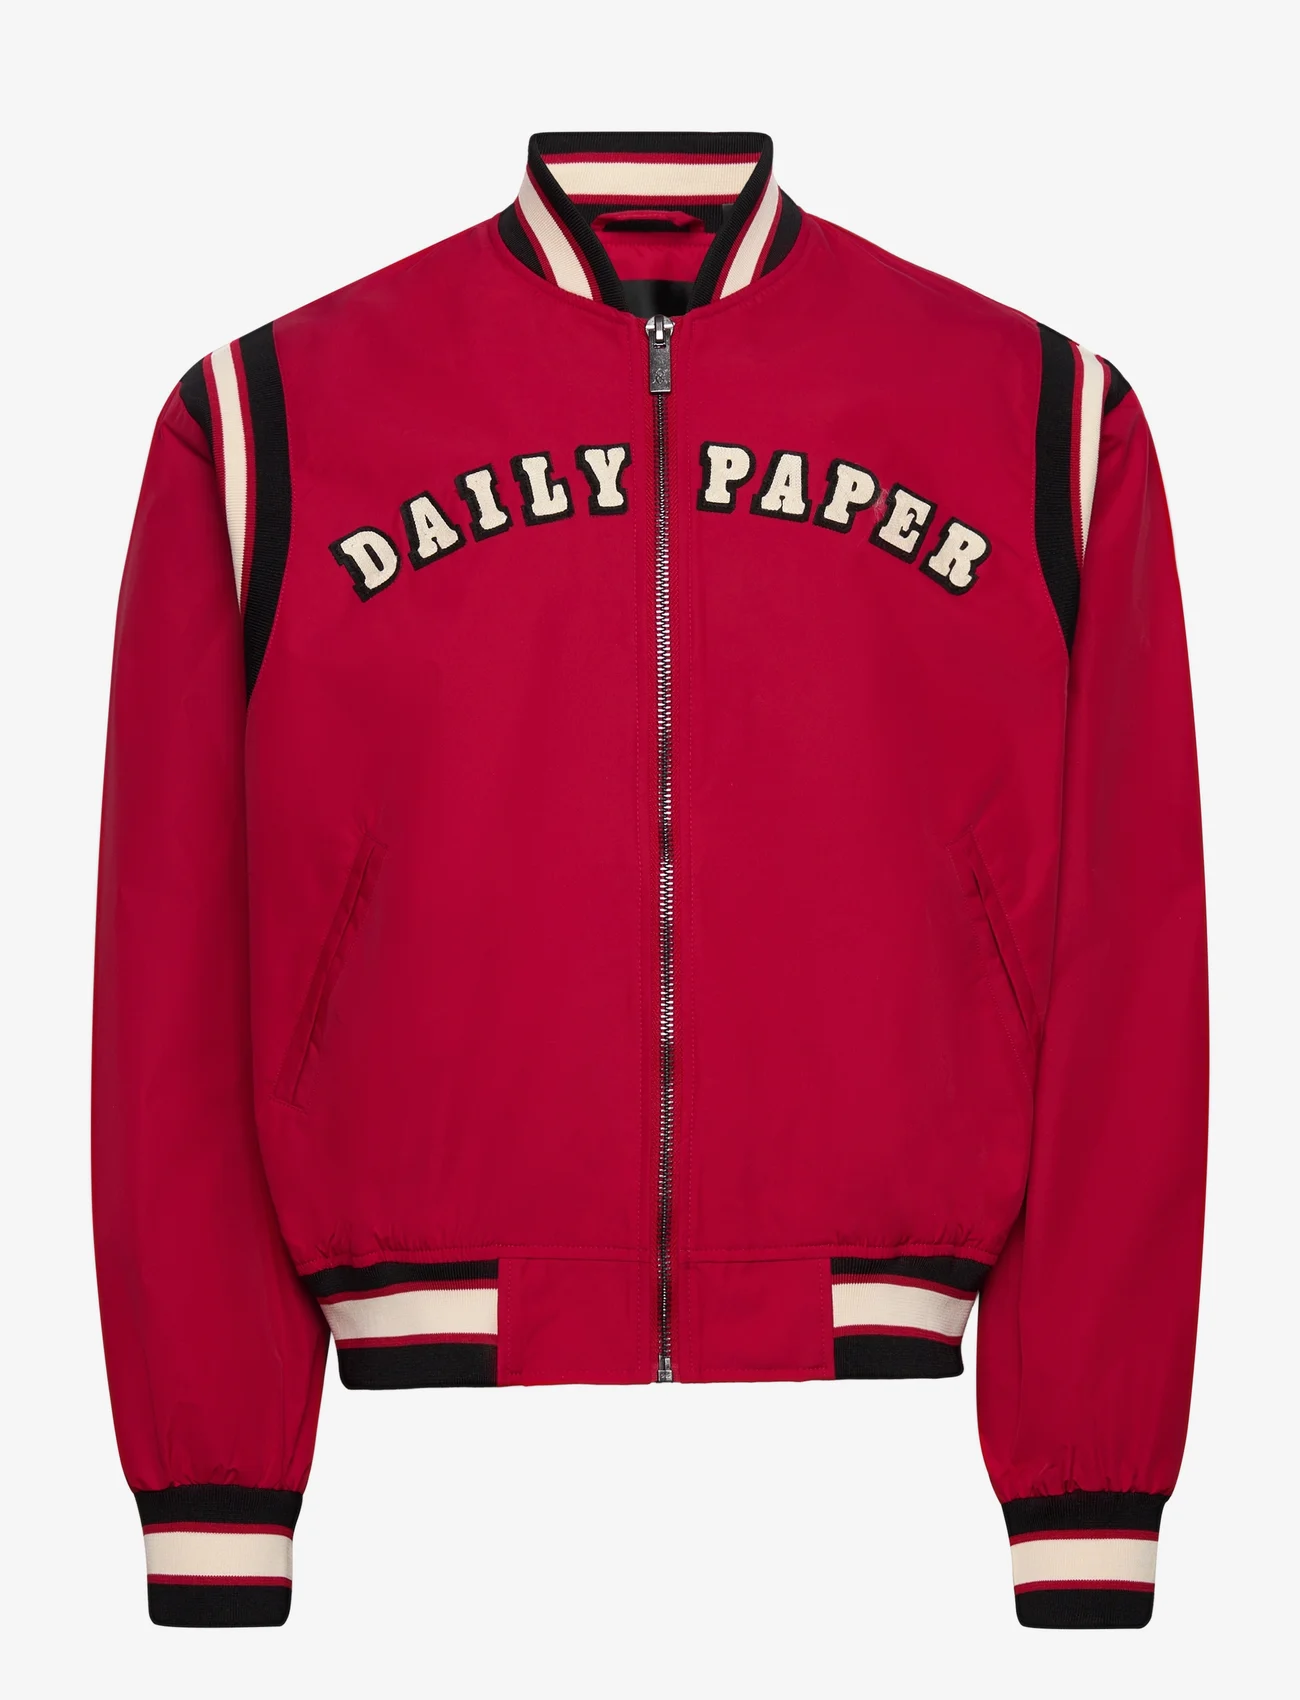 Daily Paper - peregia jacket - jackets - jester red/black - 0